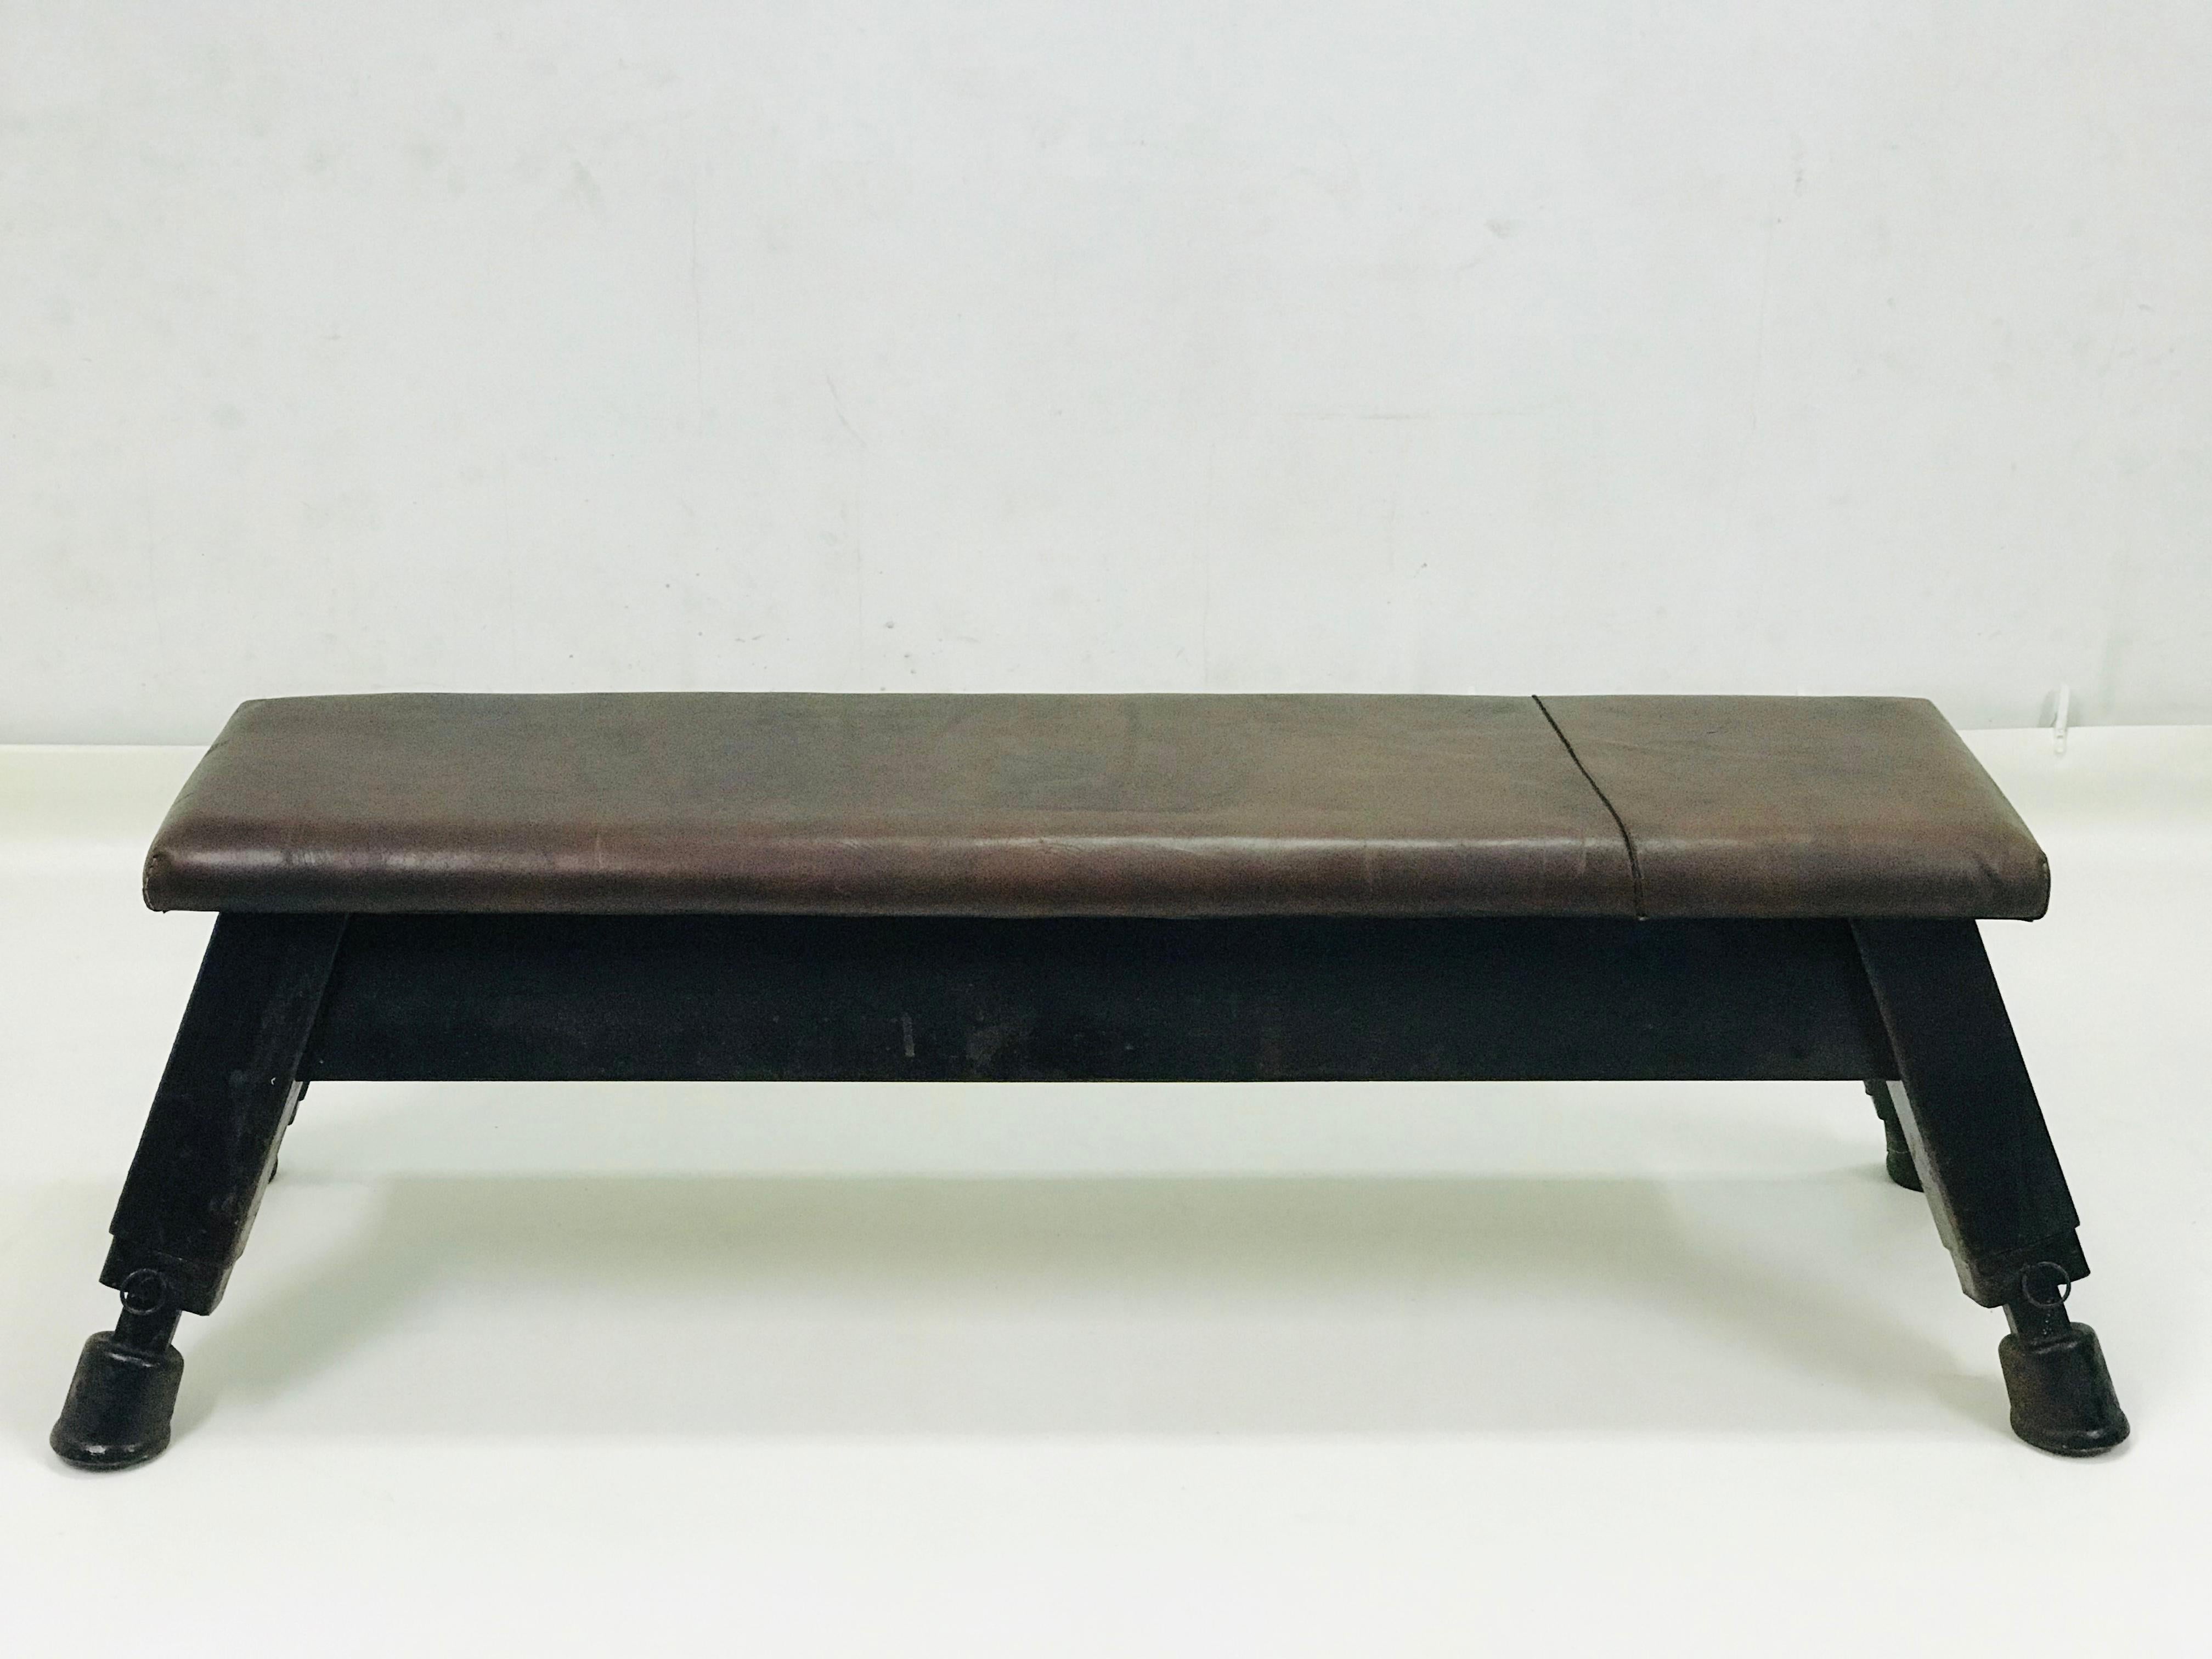 This bench has the massive stable construction with strong leather with original patina. It has setting legs for different height. The dimension of the upper leather desk is 152 x 40 x 7 cm.